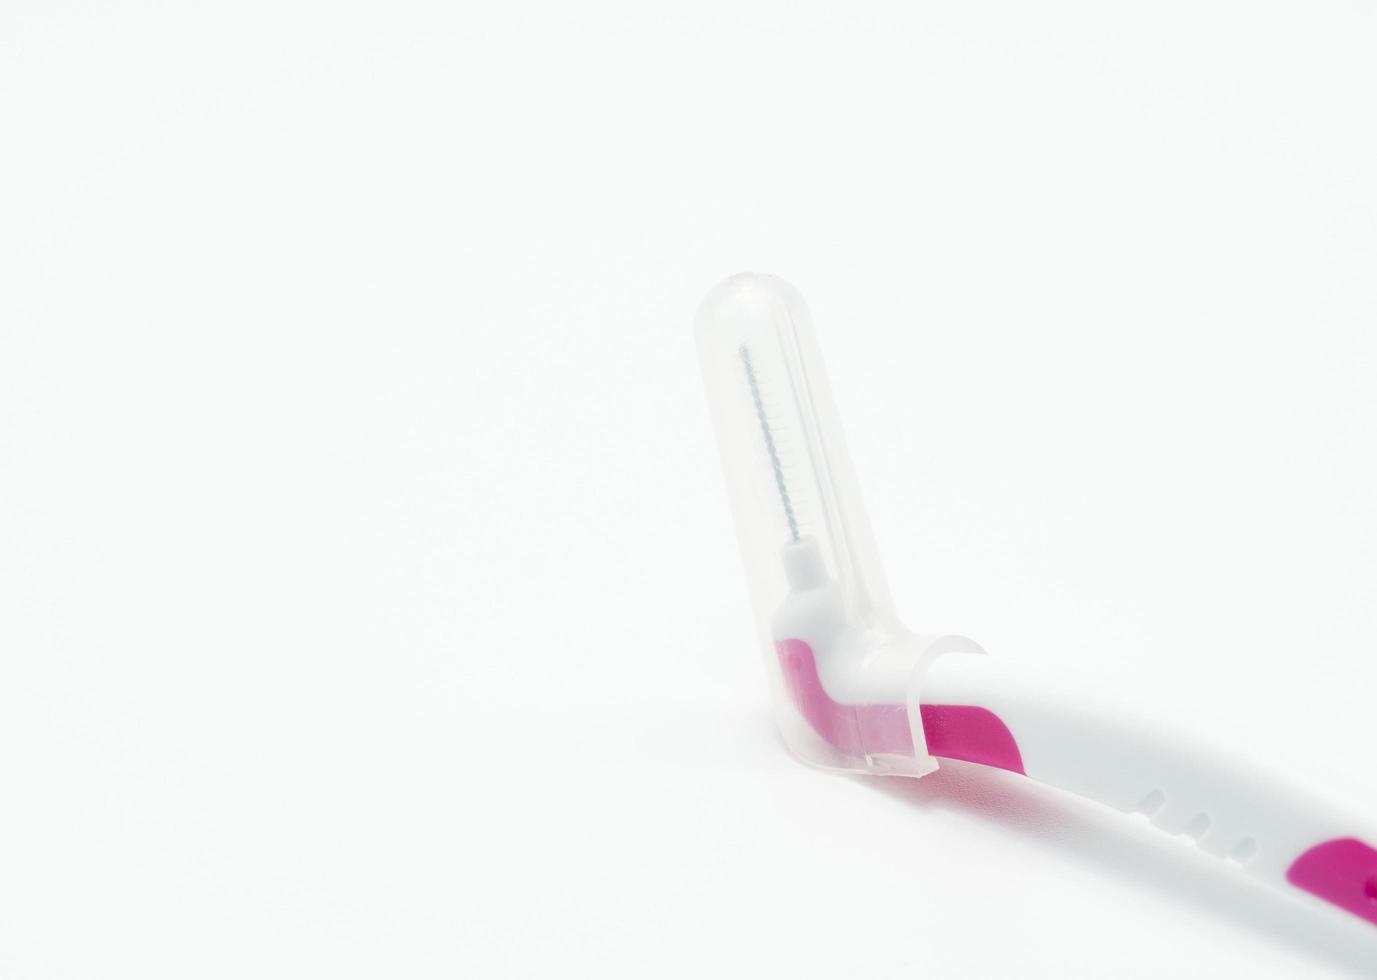 Interdental brush with white and pink plastic grip isolated on white background. Interdental toothbrushes for mouth hygiene. Braces brushes. Dental care or good dental hygiene concept. Medical tools. photo